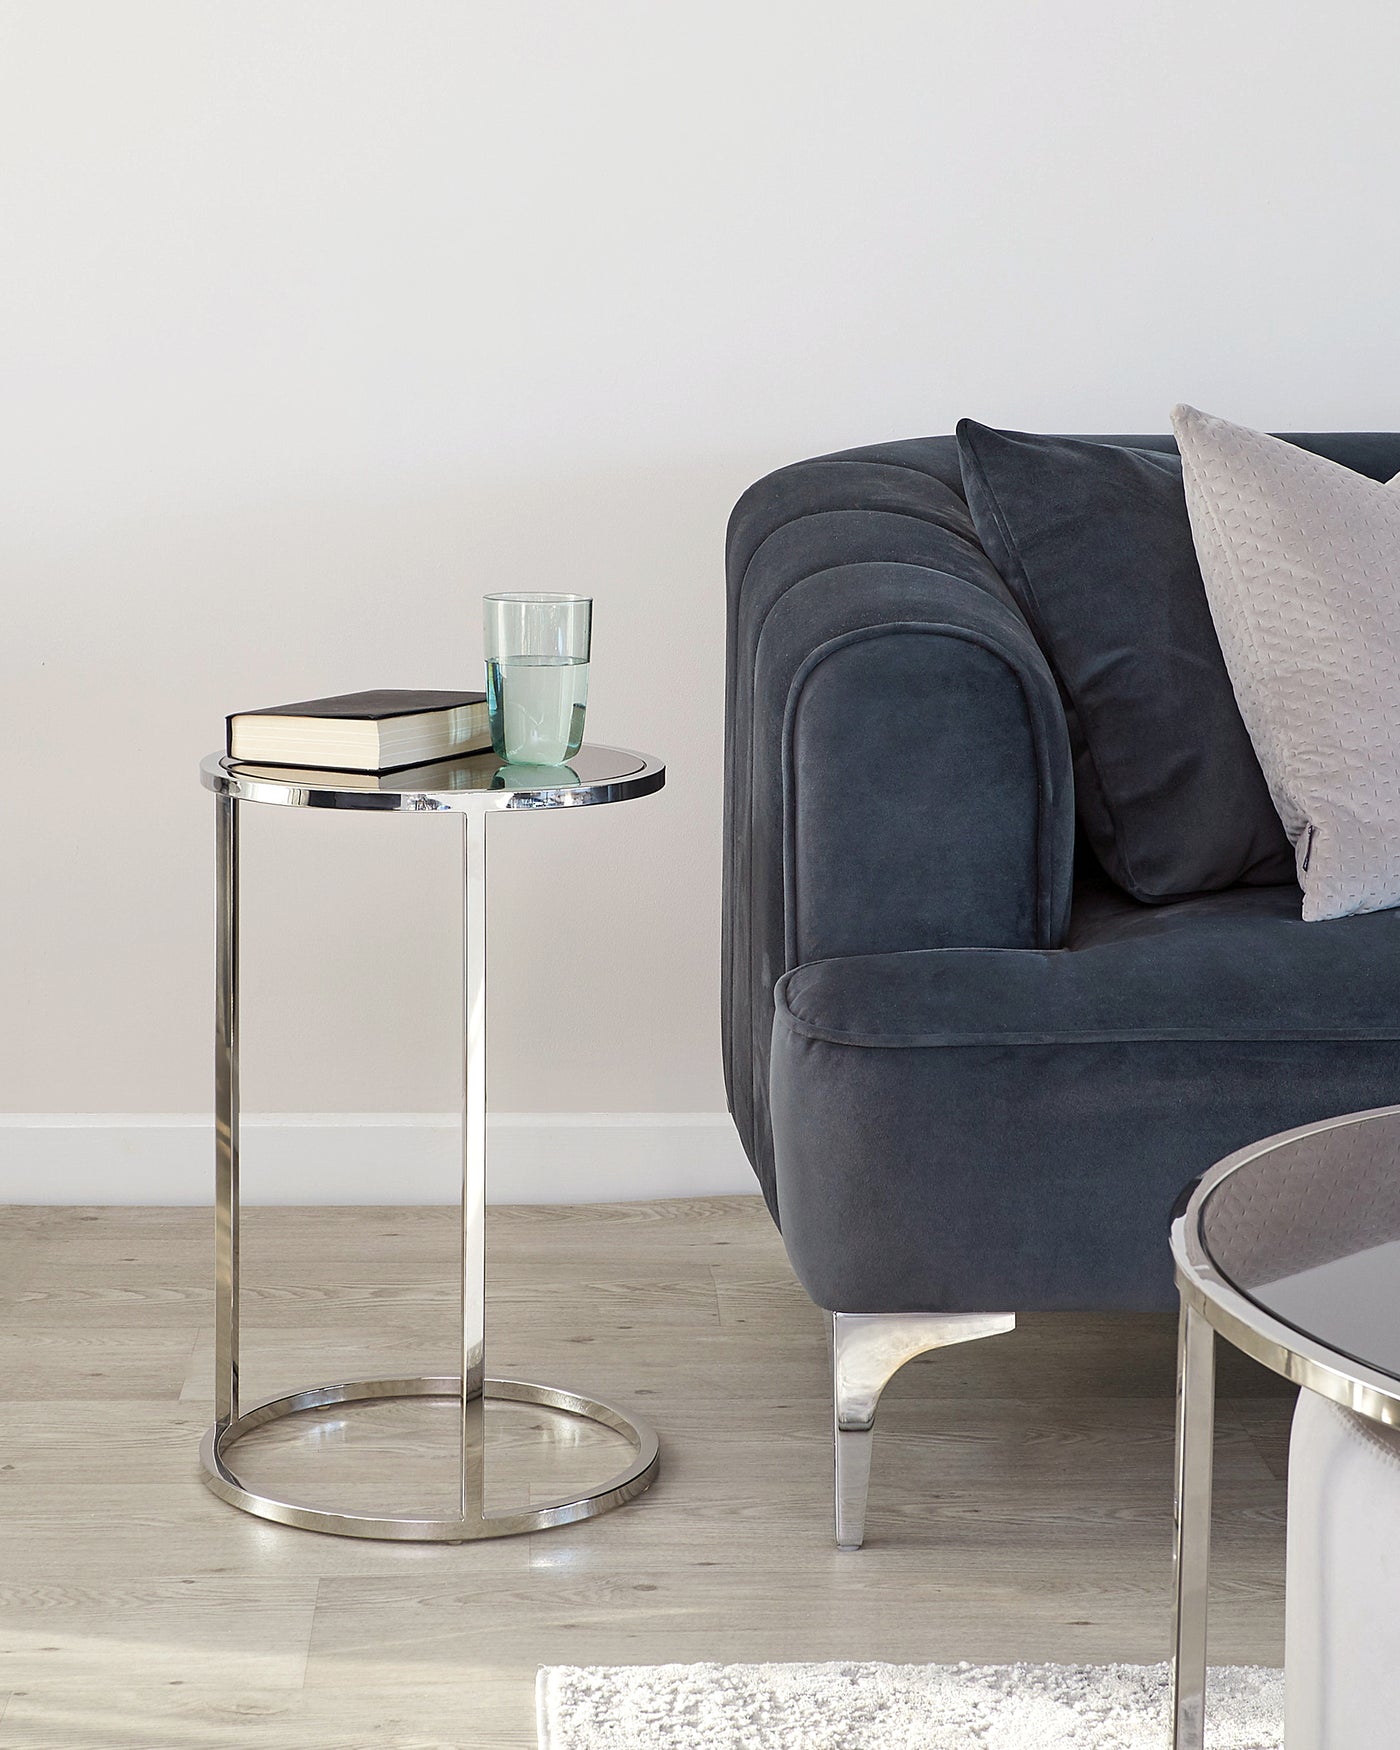 A modern, round, glass-top side table with a chrome base, positioned next to a dark grey fabric upholstered sofa with plush cushions.